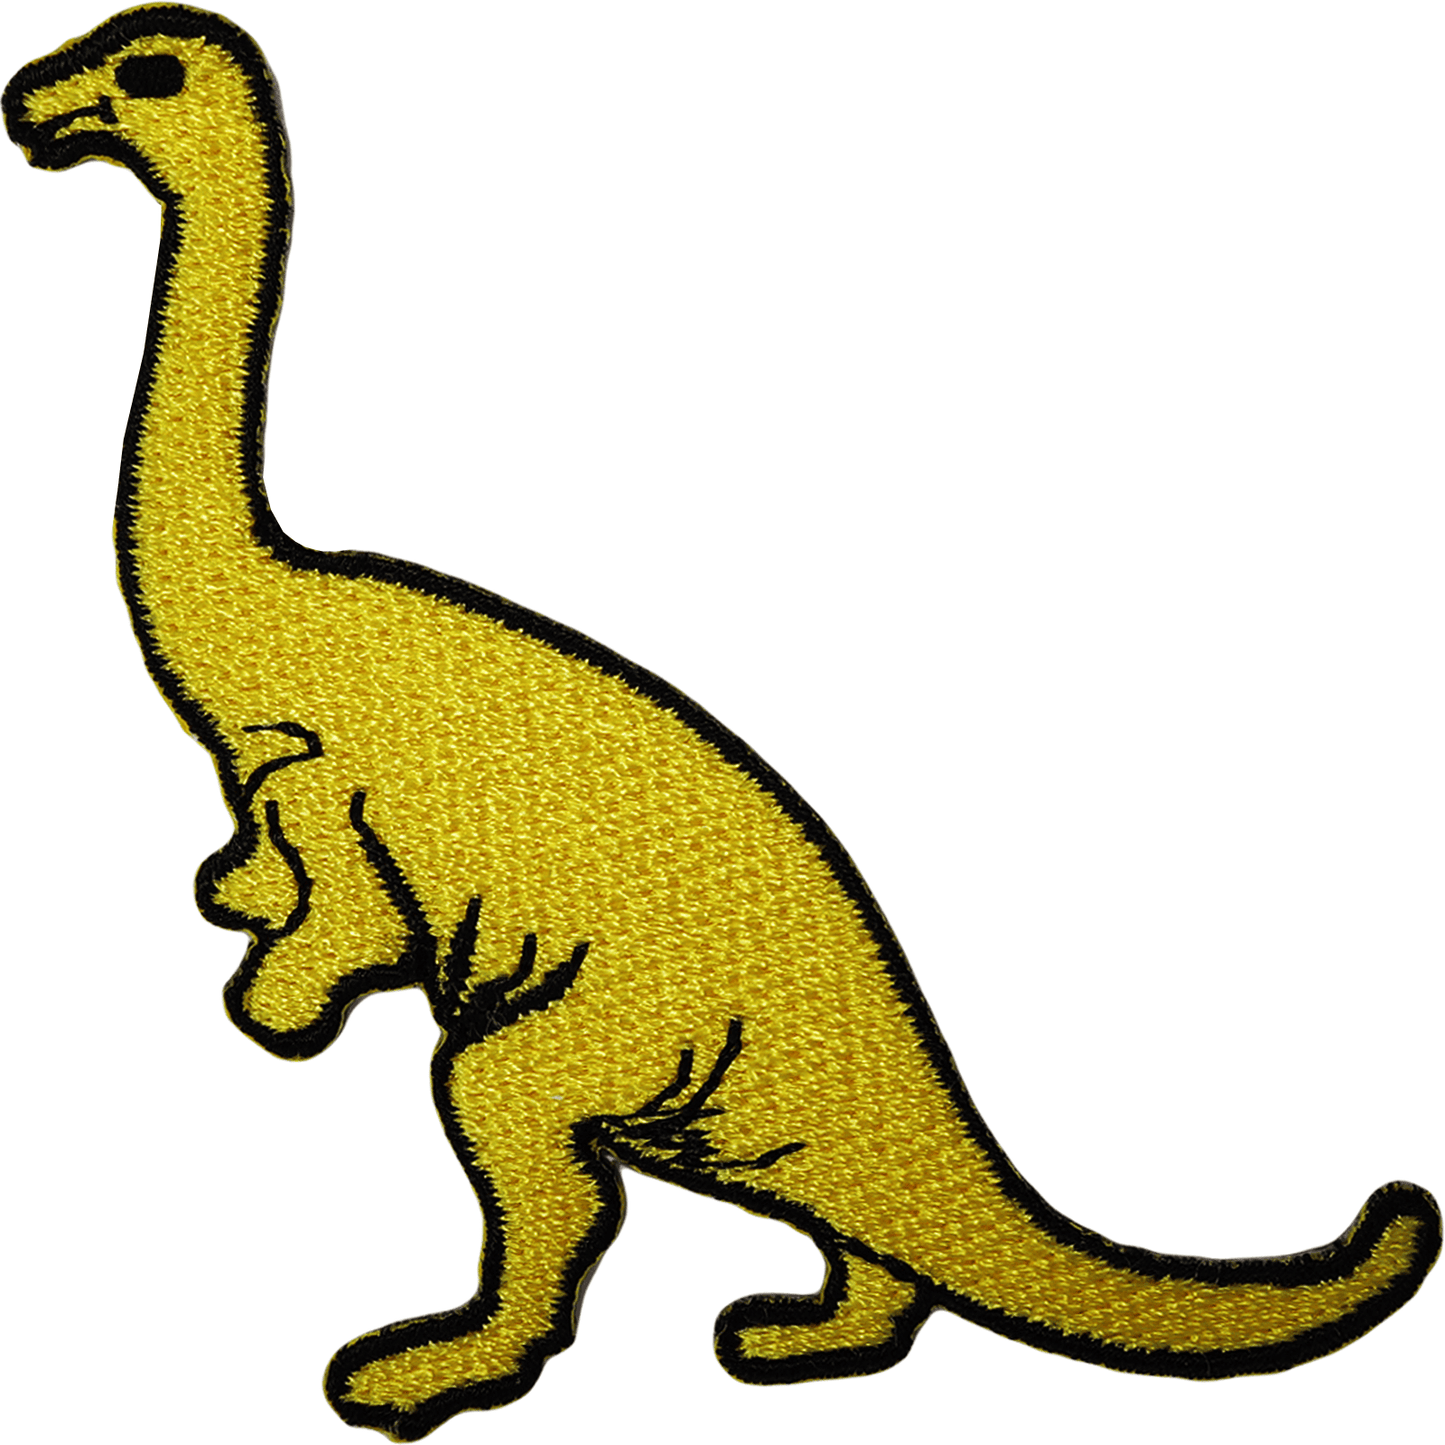 Dinosaur Iron Sew On Patch Kids T Shirt Jeans Jacket Cap Bag Embroidered Badge